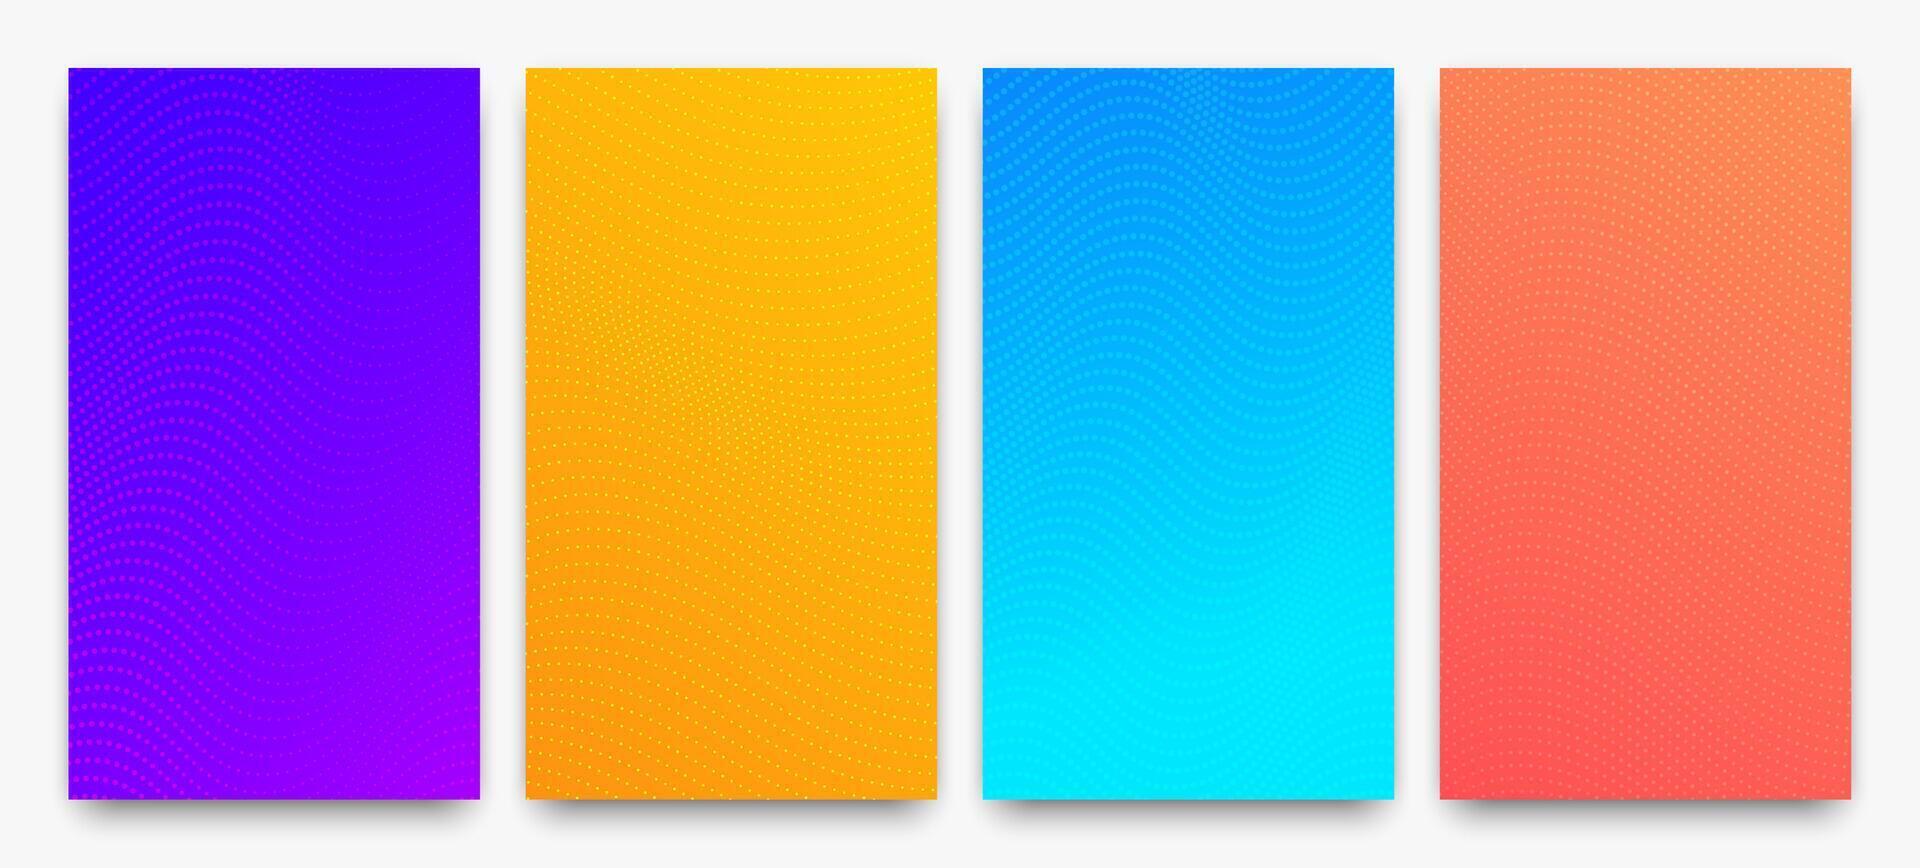 Set of halftone gradient backgrounds with dots vector